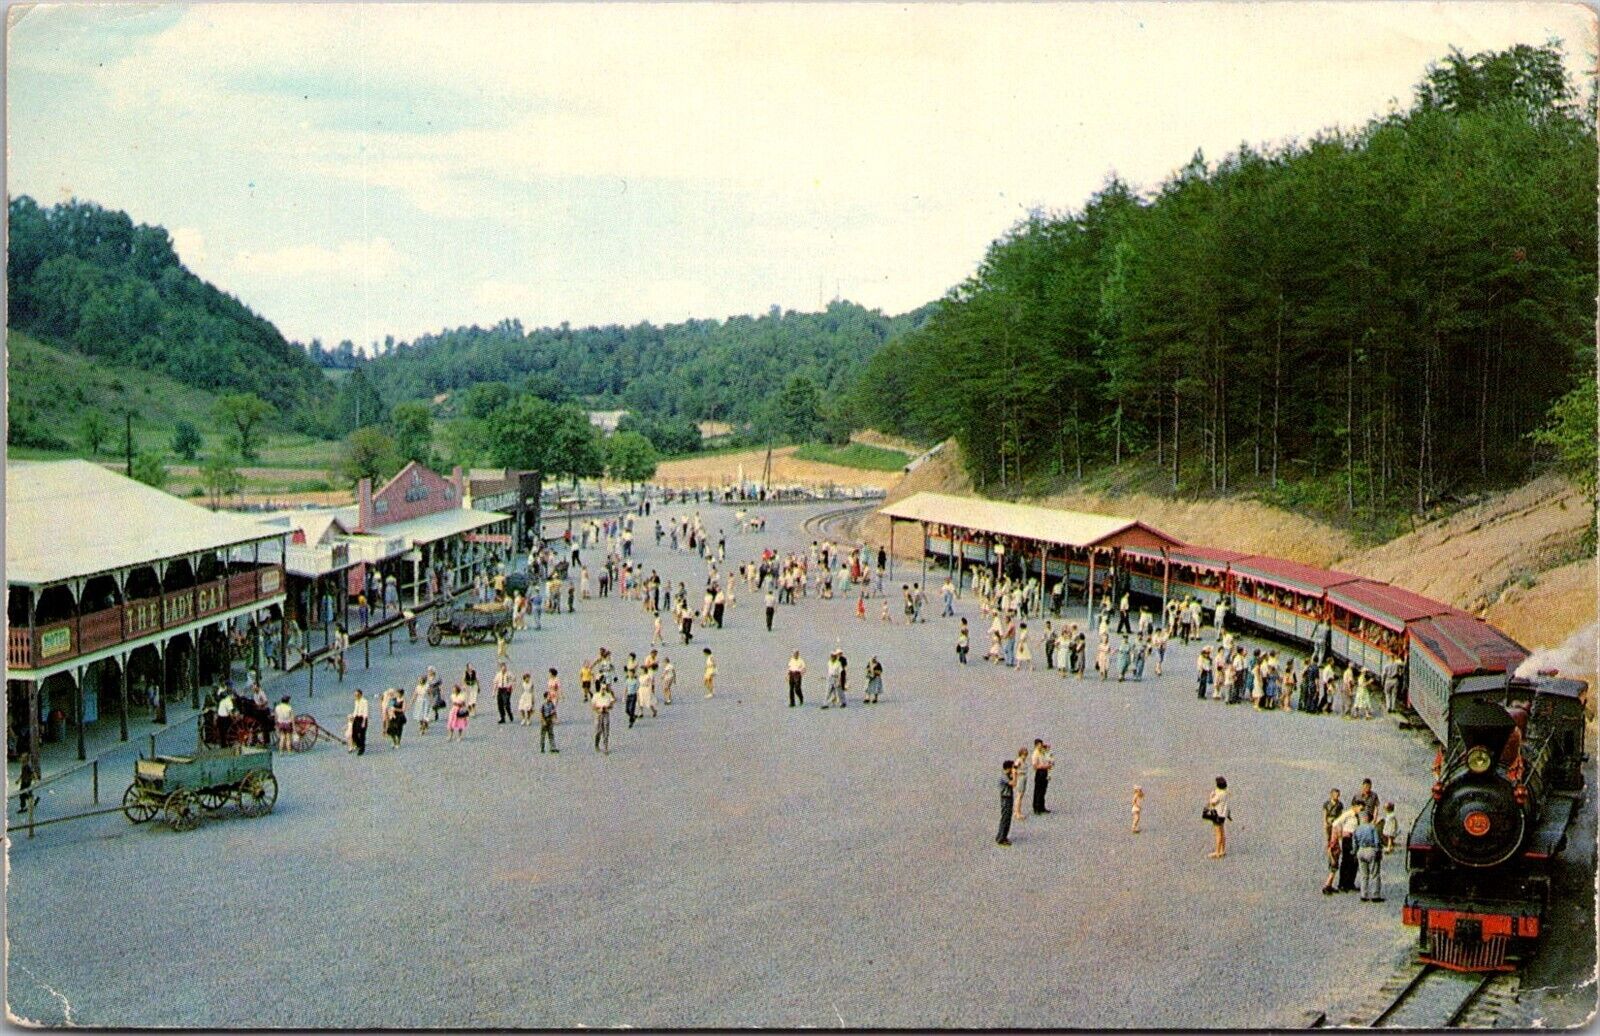 Rebel Railroad and Rebeltown, Dollywood, Pigeon Forge TN c1965 Postcard X59